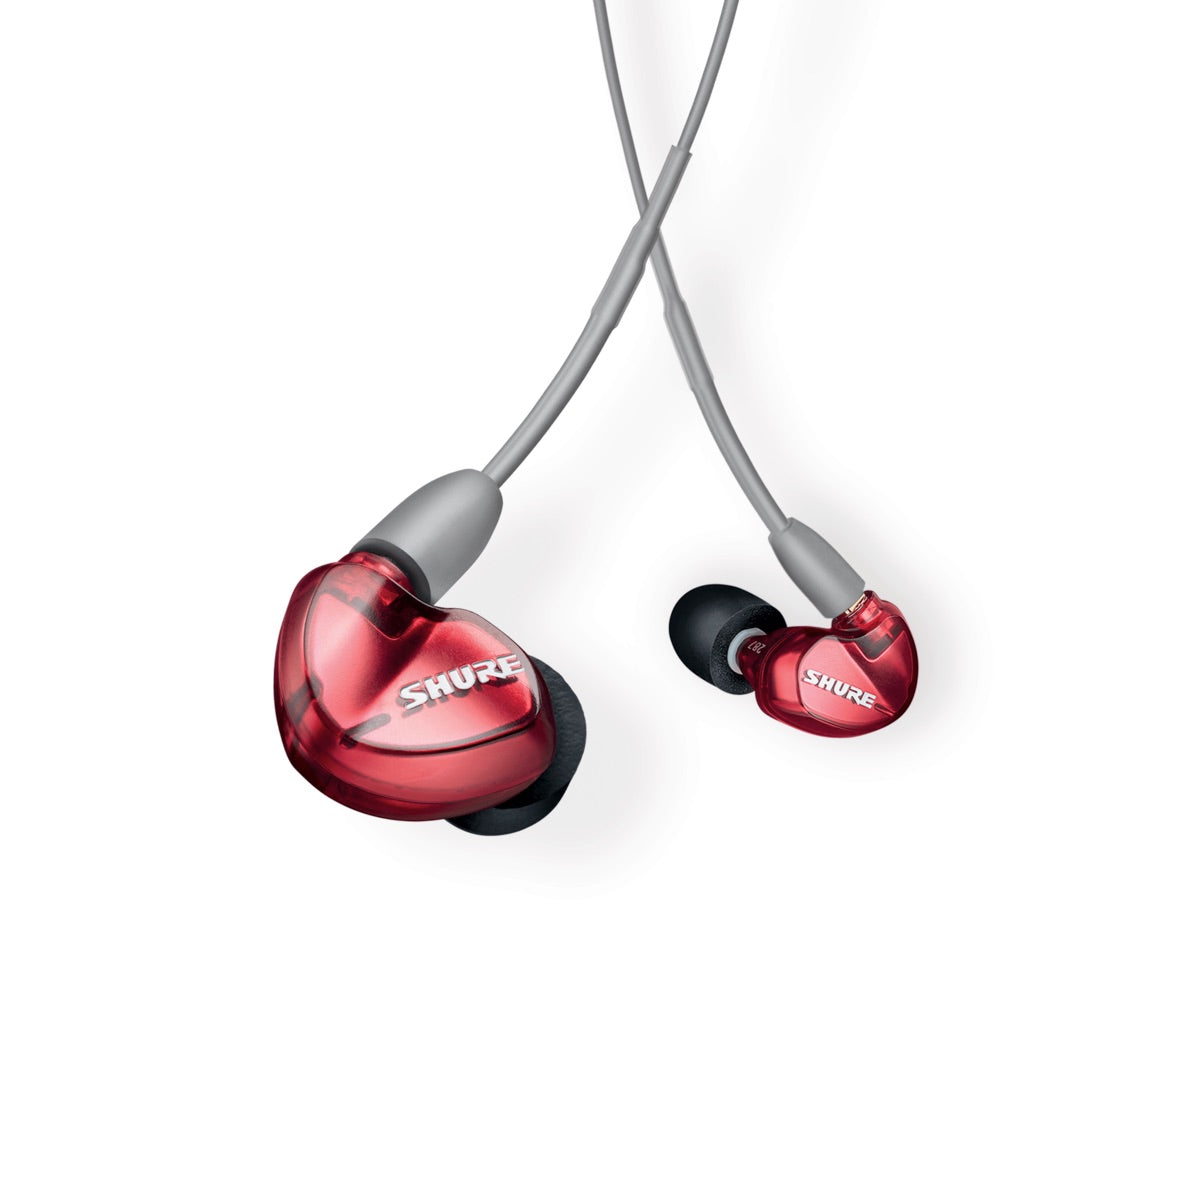 Shure SE535-LTD - Limited Edition Sound Isolating Triple Driver Earphone, Red